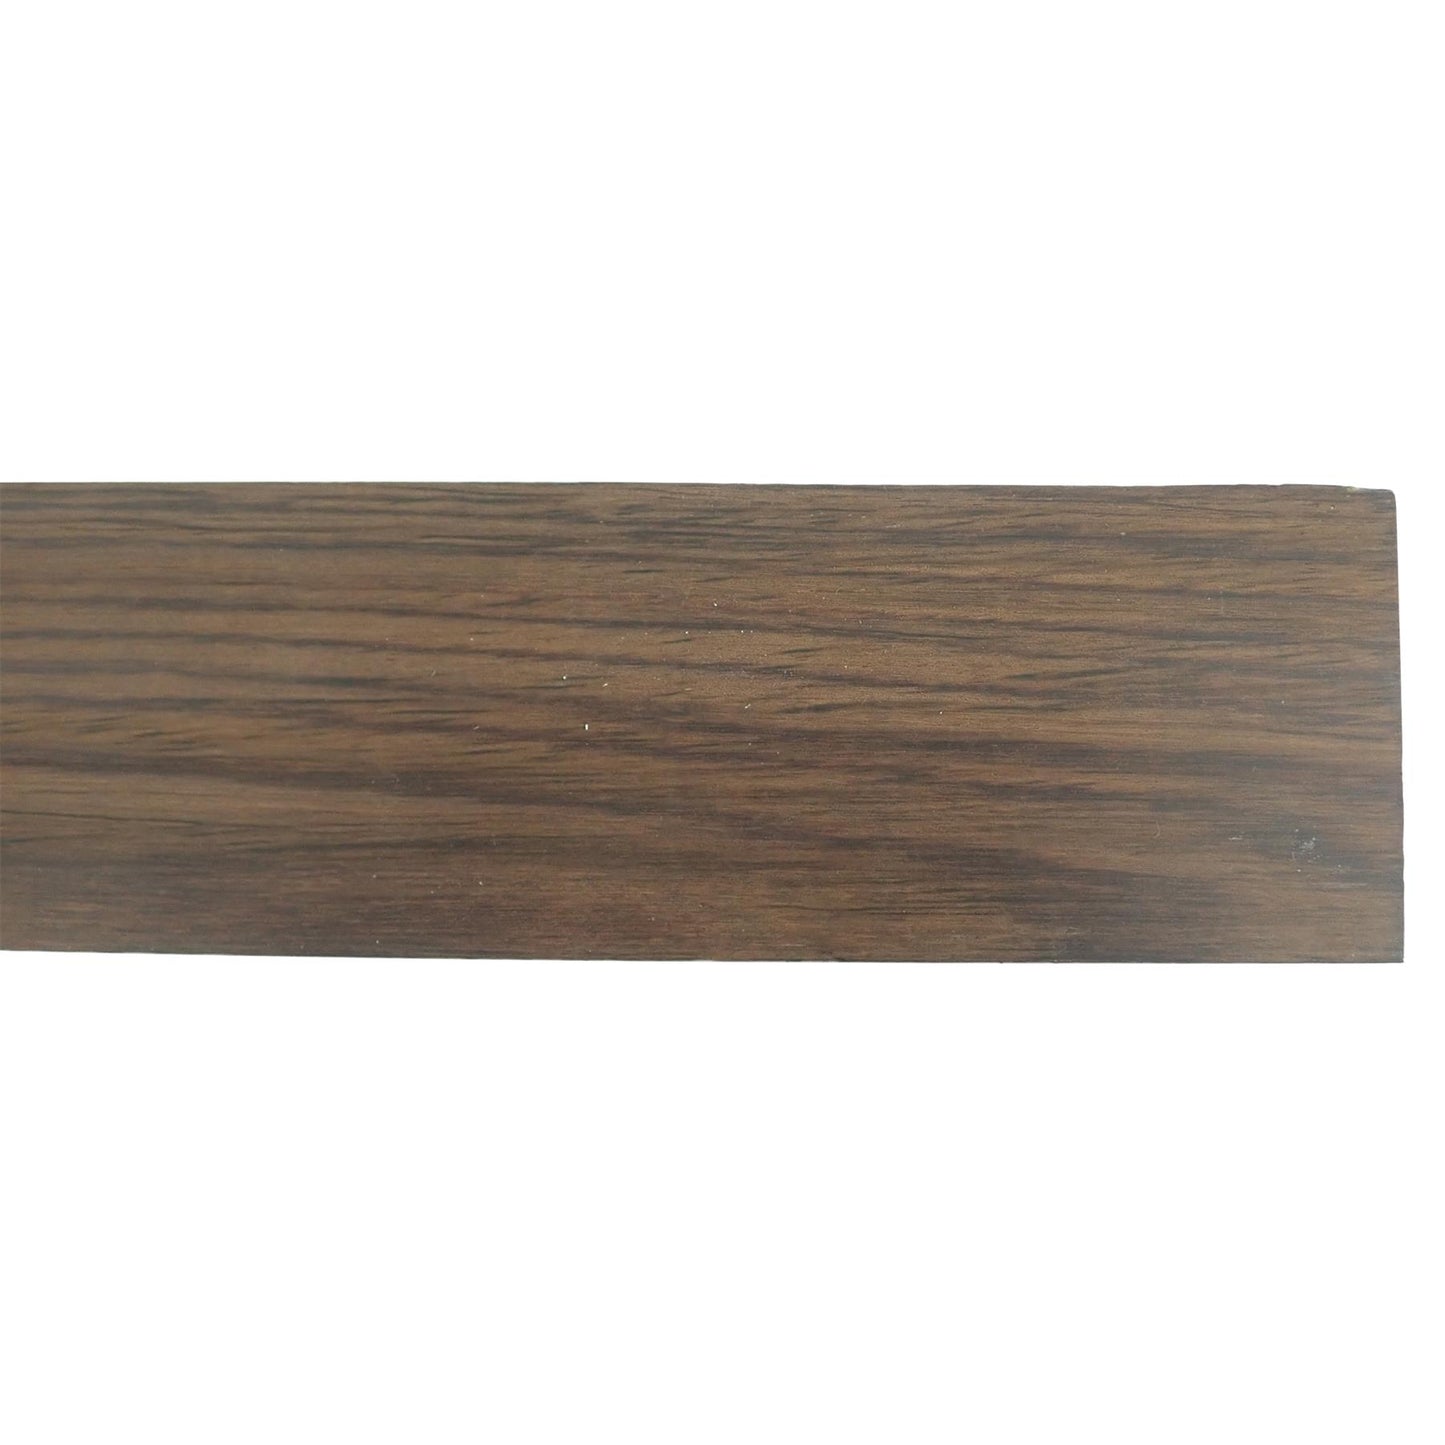 Luthitec Indian Rosewood Guitar Fingerboard Blank (Unslotted) - 530x65x6mm B